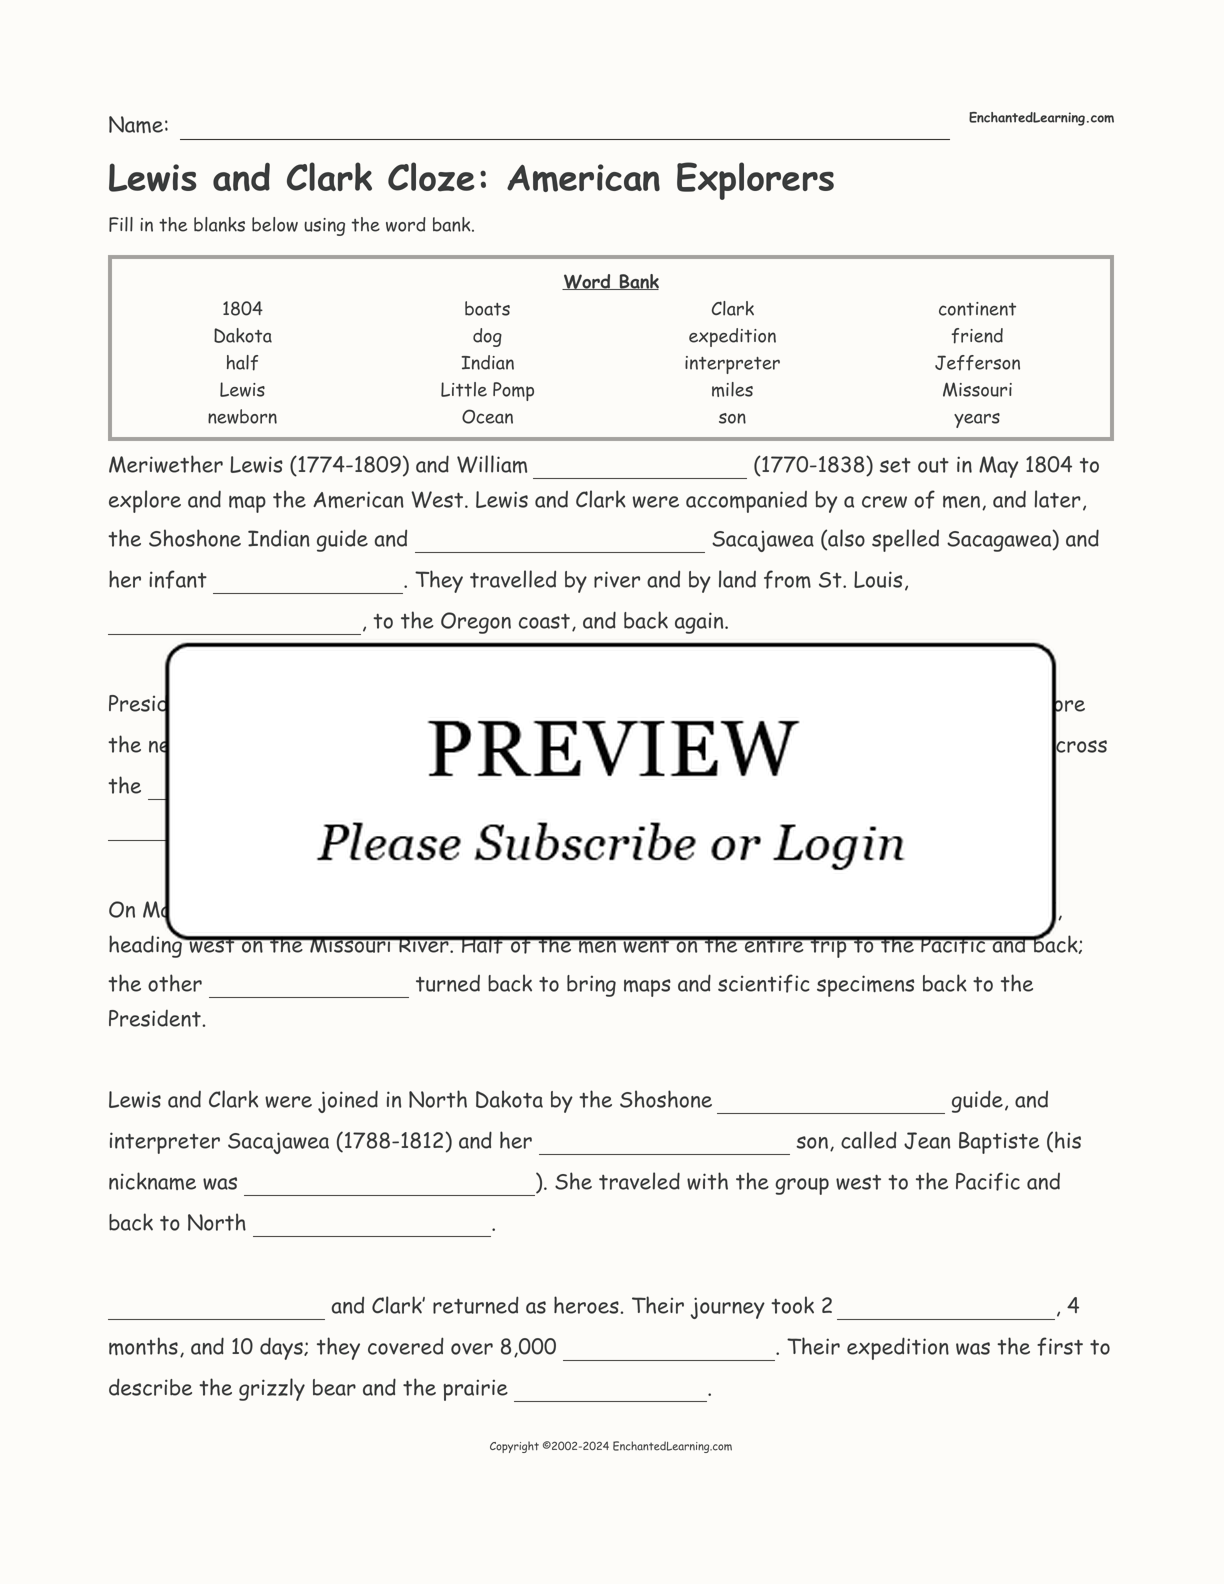 Lewis and Clark Cloze: American Explorers interactive worksheet page 1